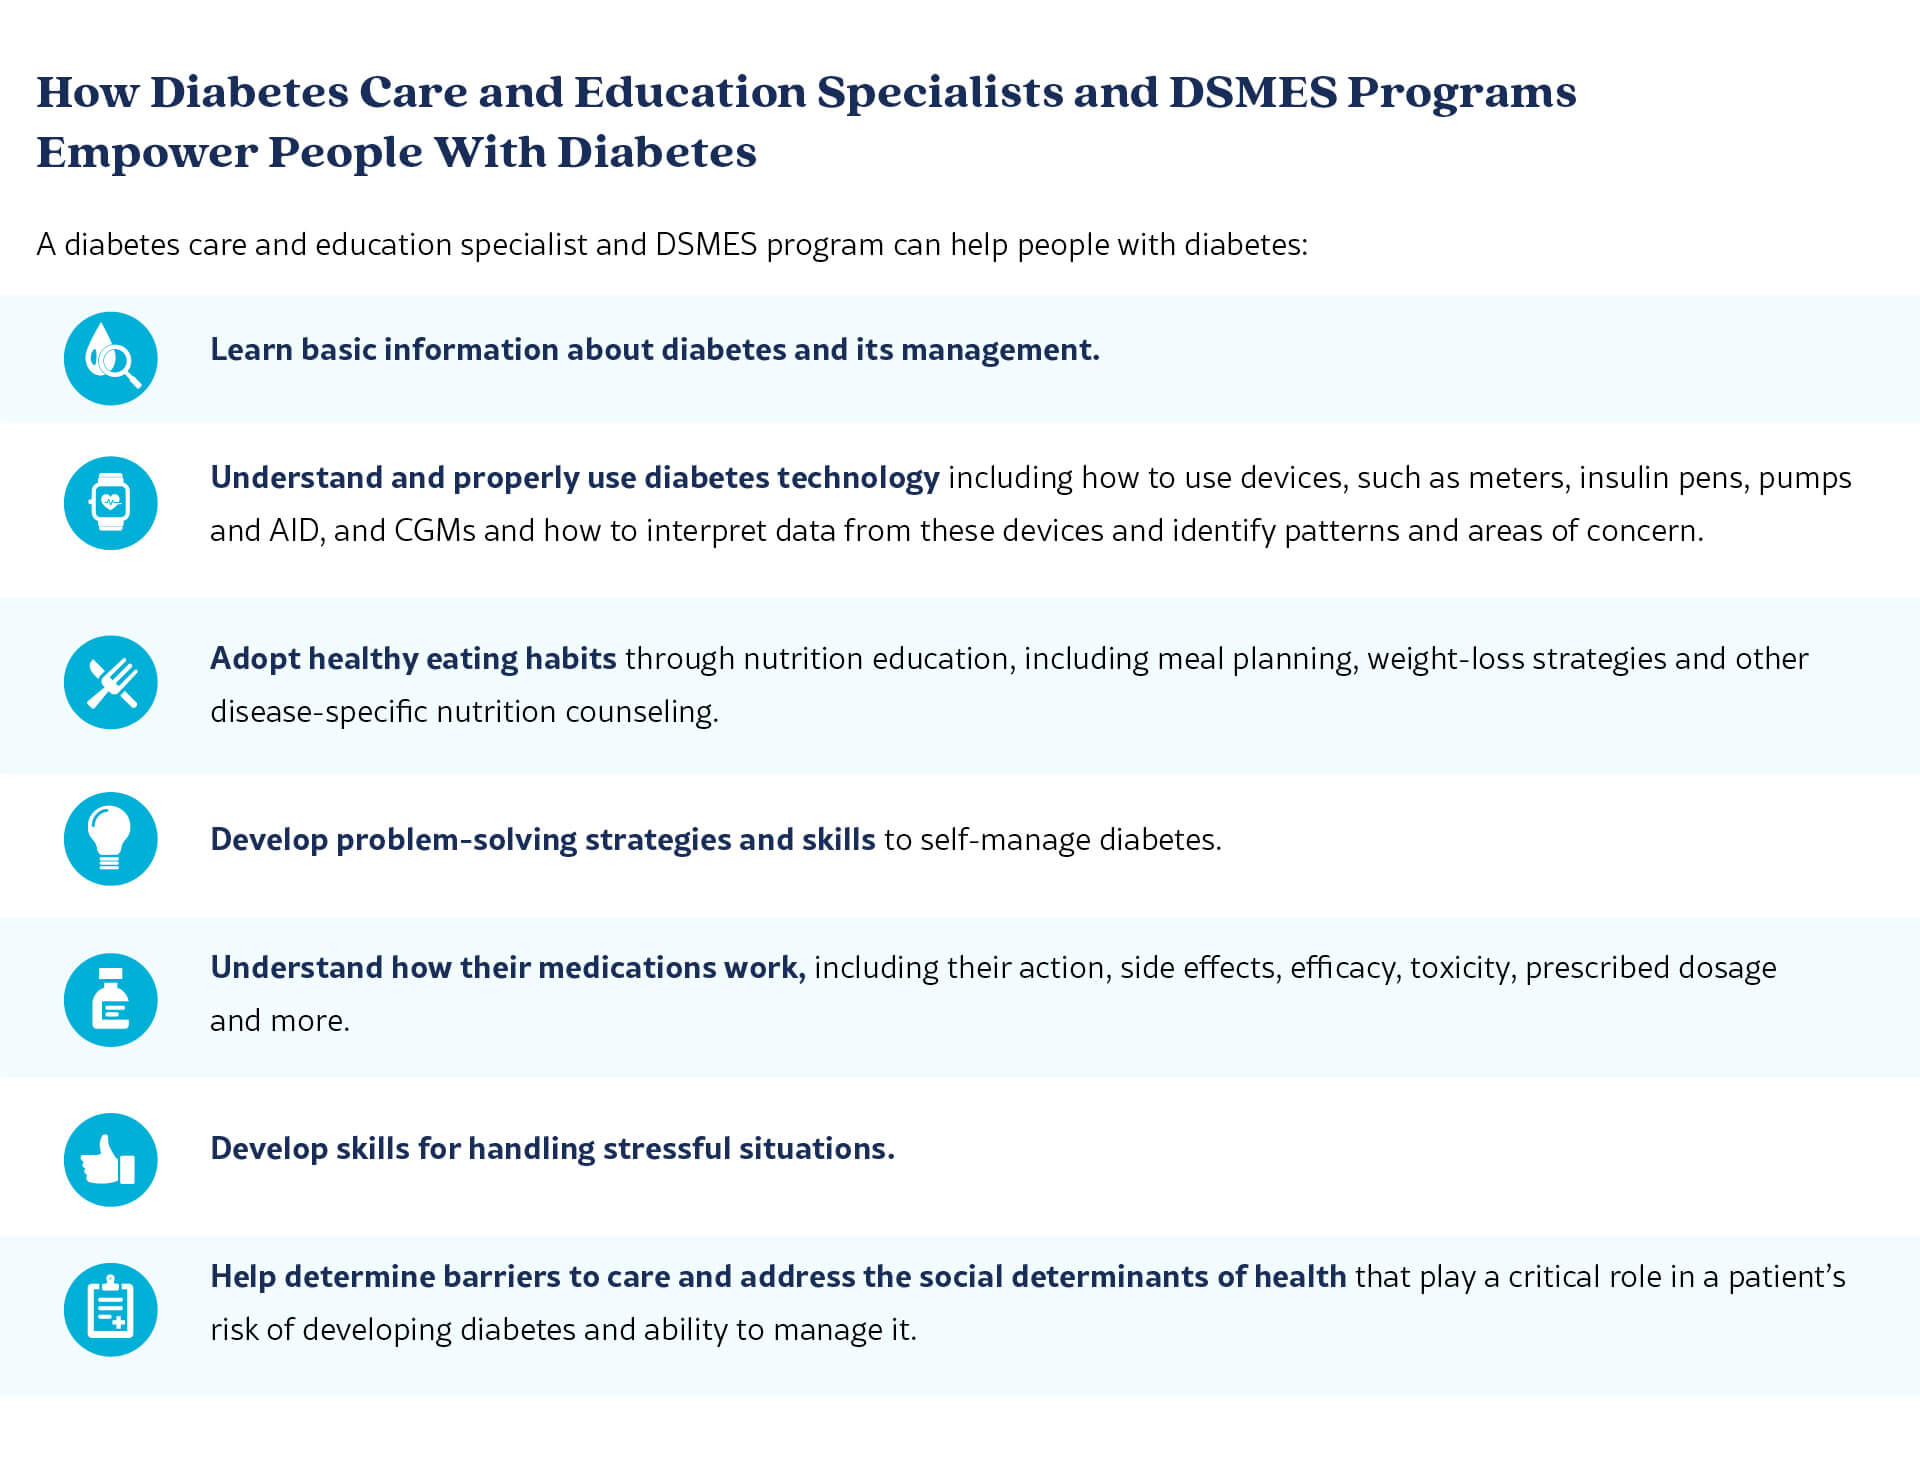 How diabetes care and education specialists and DSMES programs empower people with diabetes